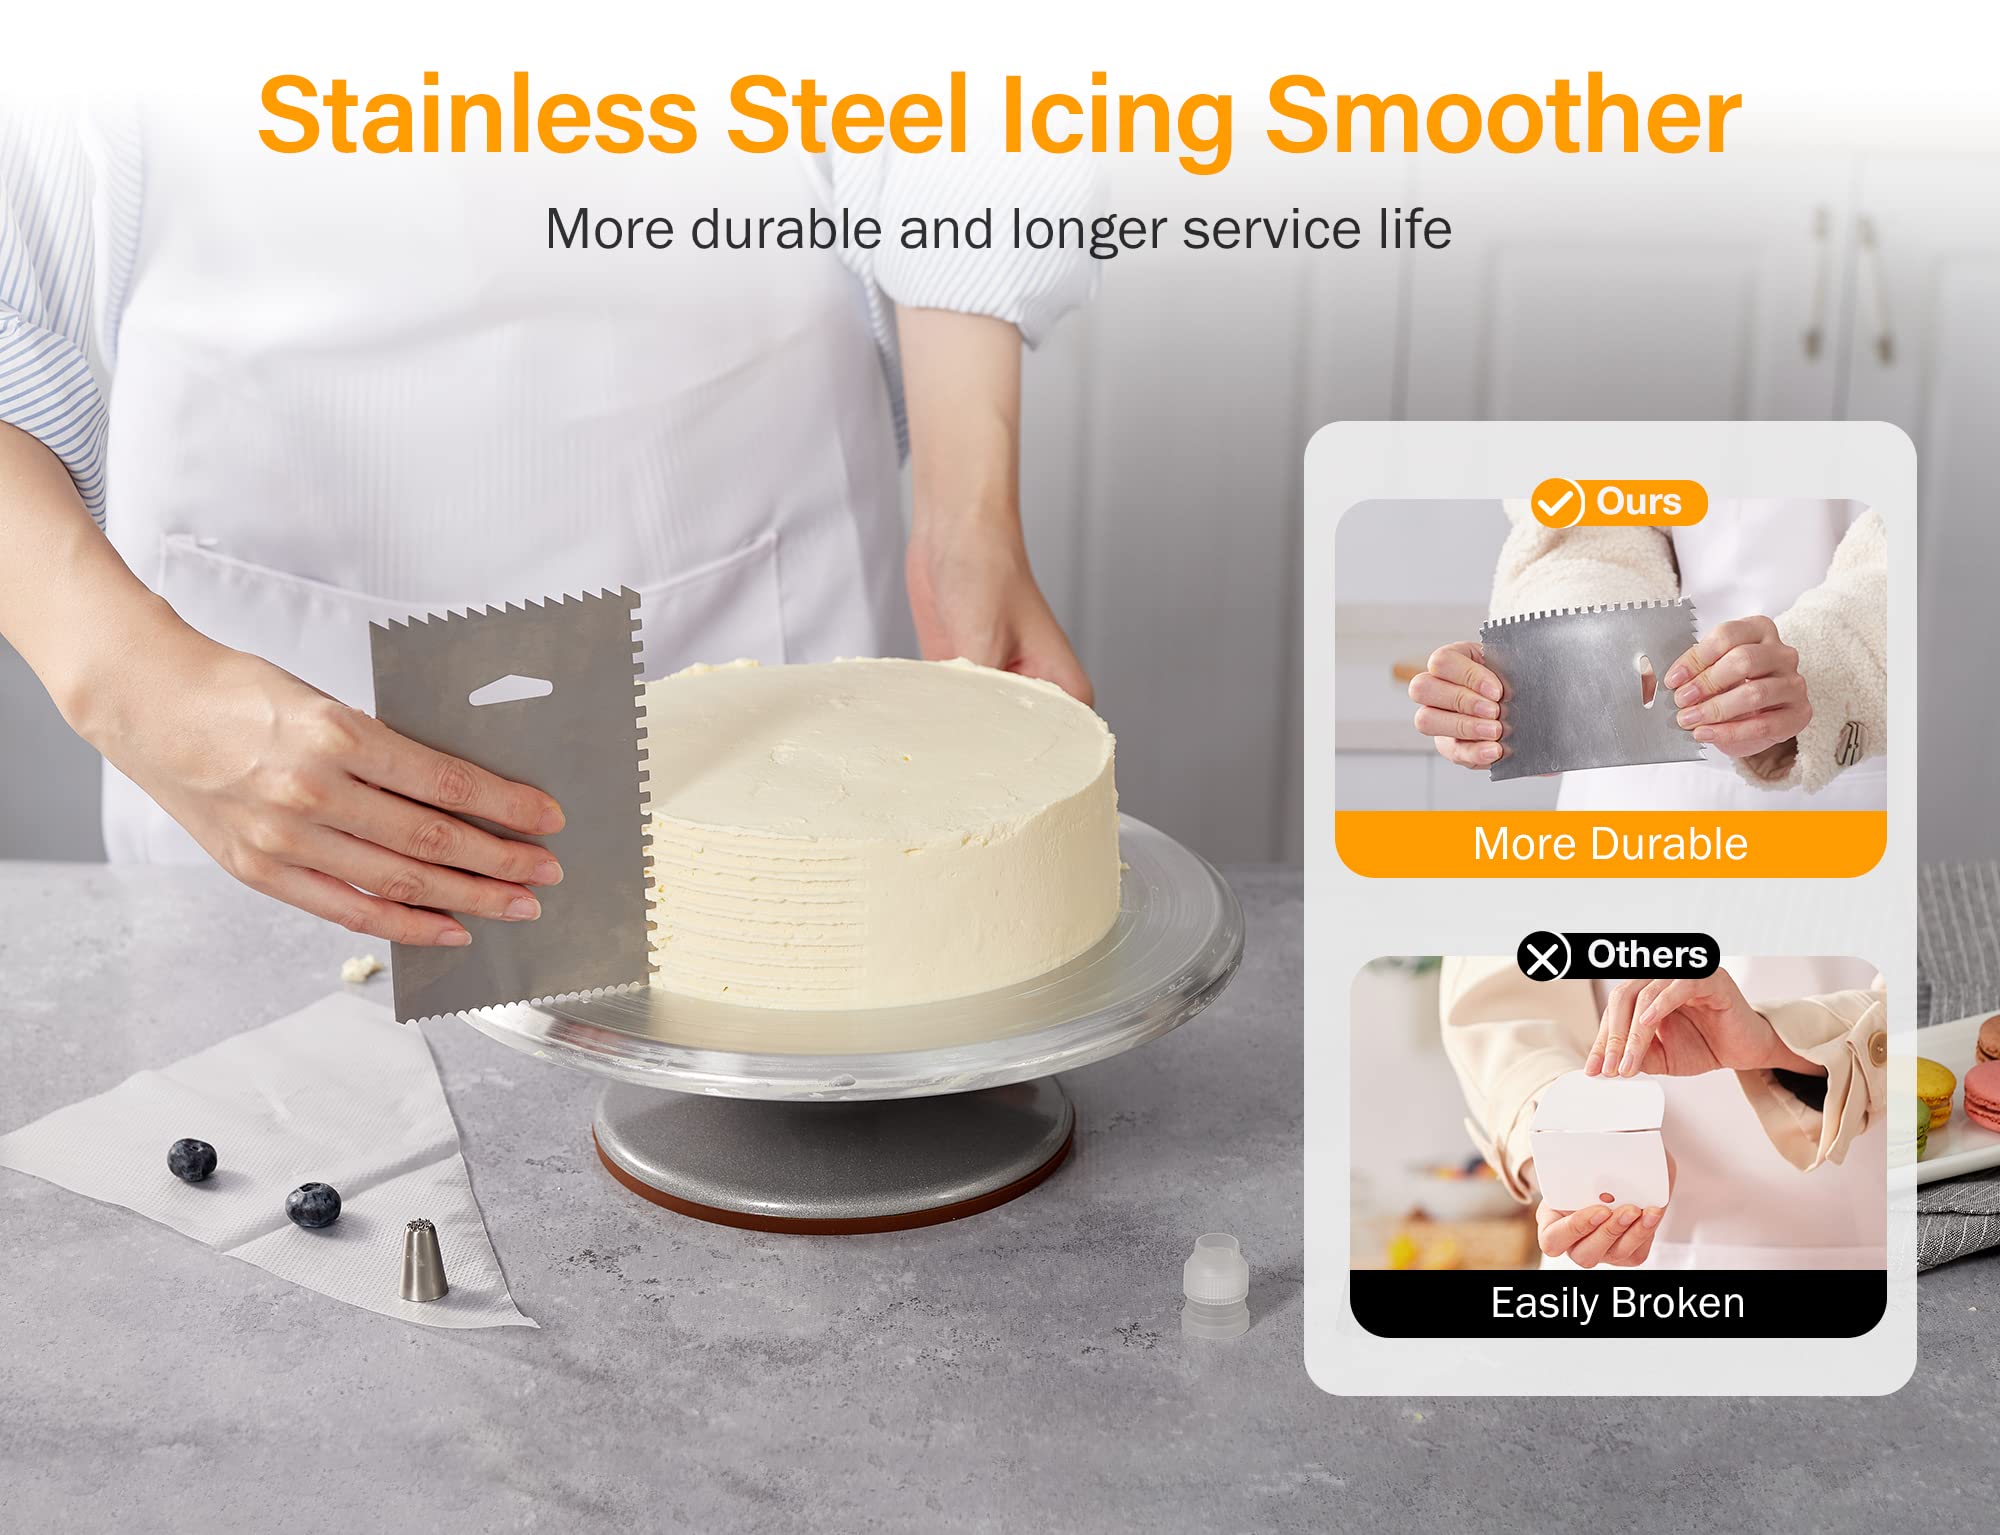 Kootek Aluminium Alloy Revolving Cake Stand 12 Inch Cake Turntable with Angled Icing Spatula and 3 Comb Icing Smoother, Silicon Spatula and Cake Server/Cutter Baking Cake Decorating Supplies